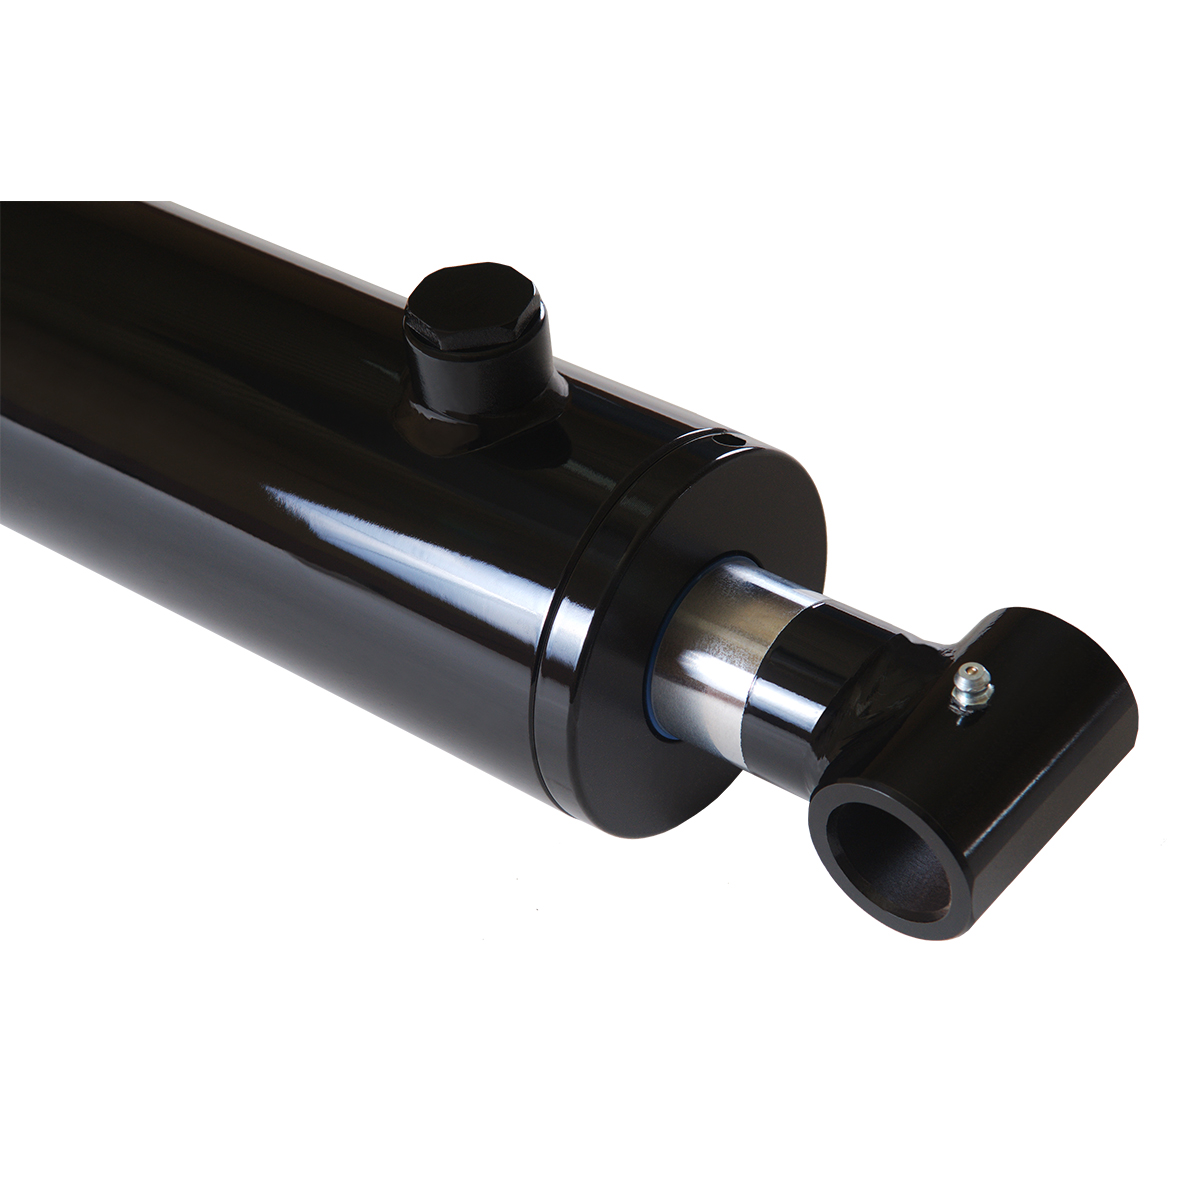 3 bore x 40 stroke hydraulic cylinder, welded cross tube double acting cylinder | Magister Hydraulics